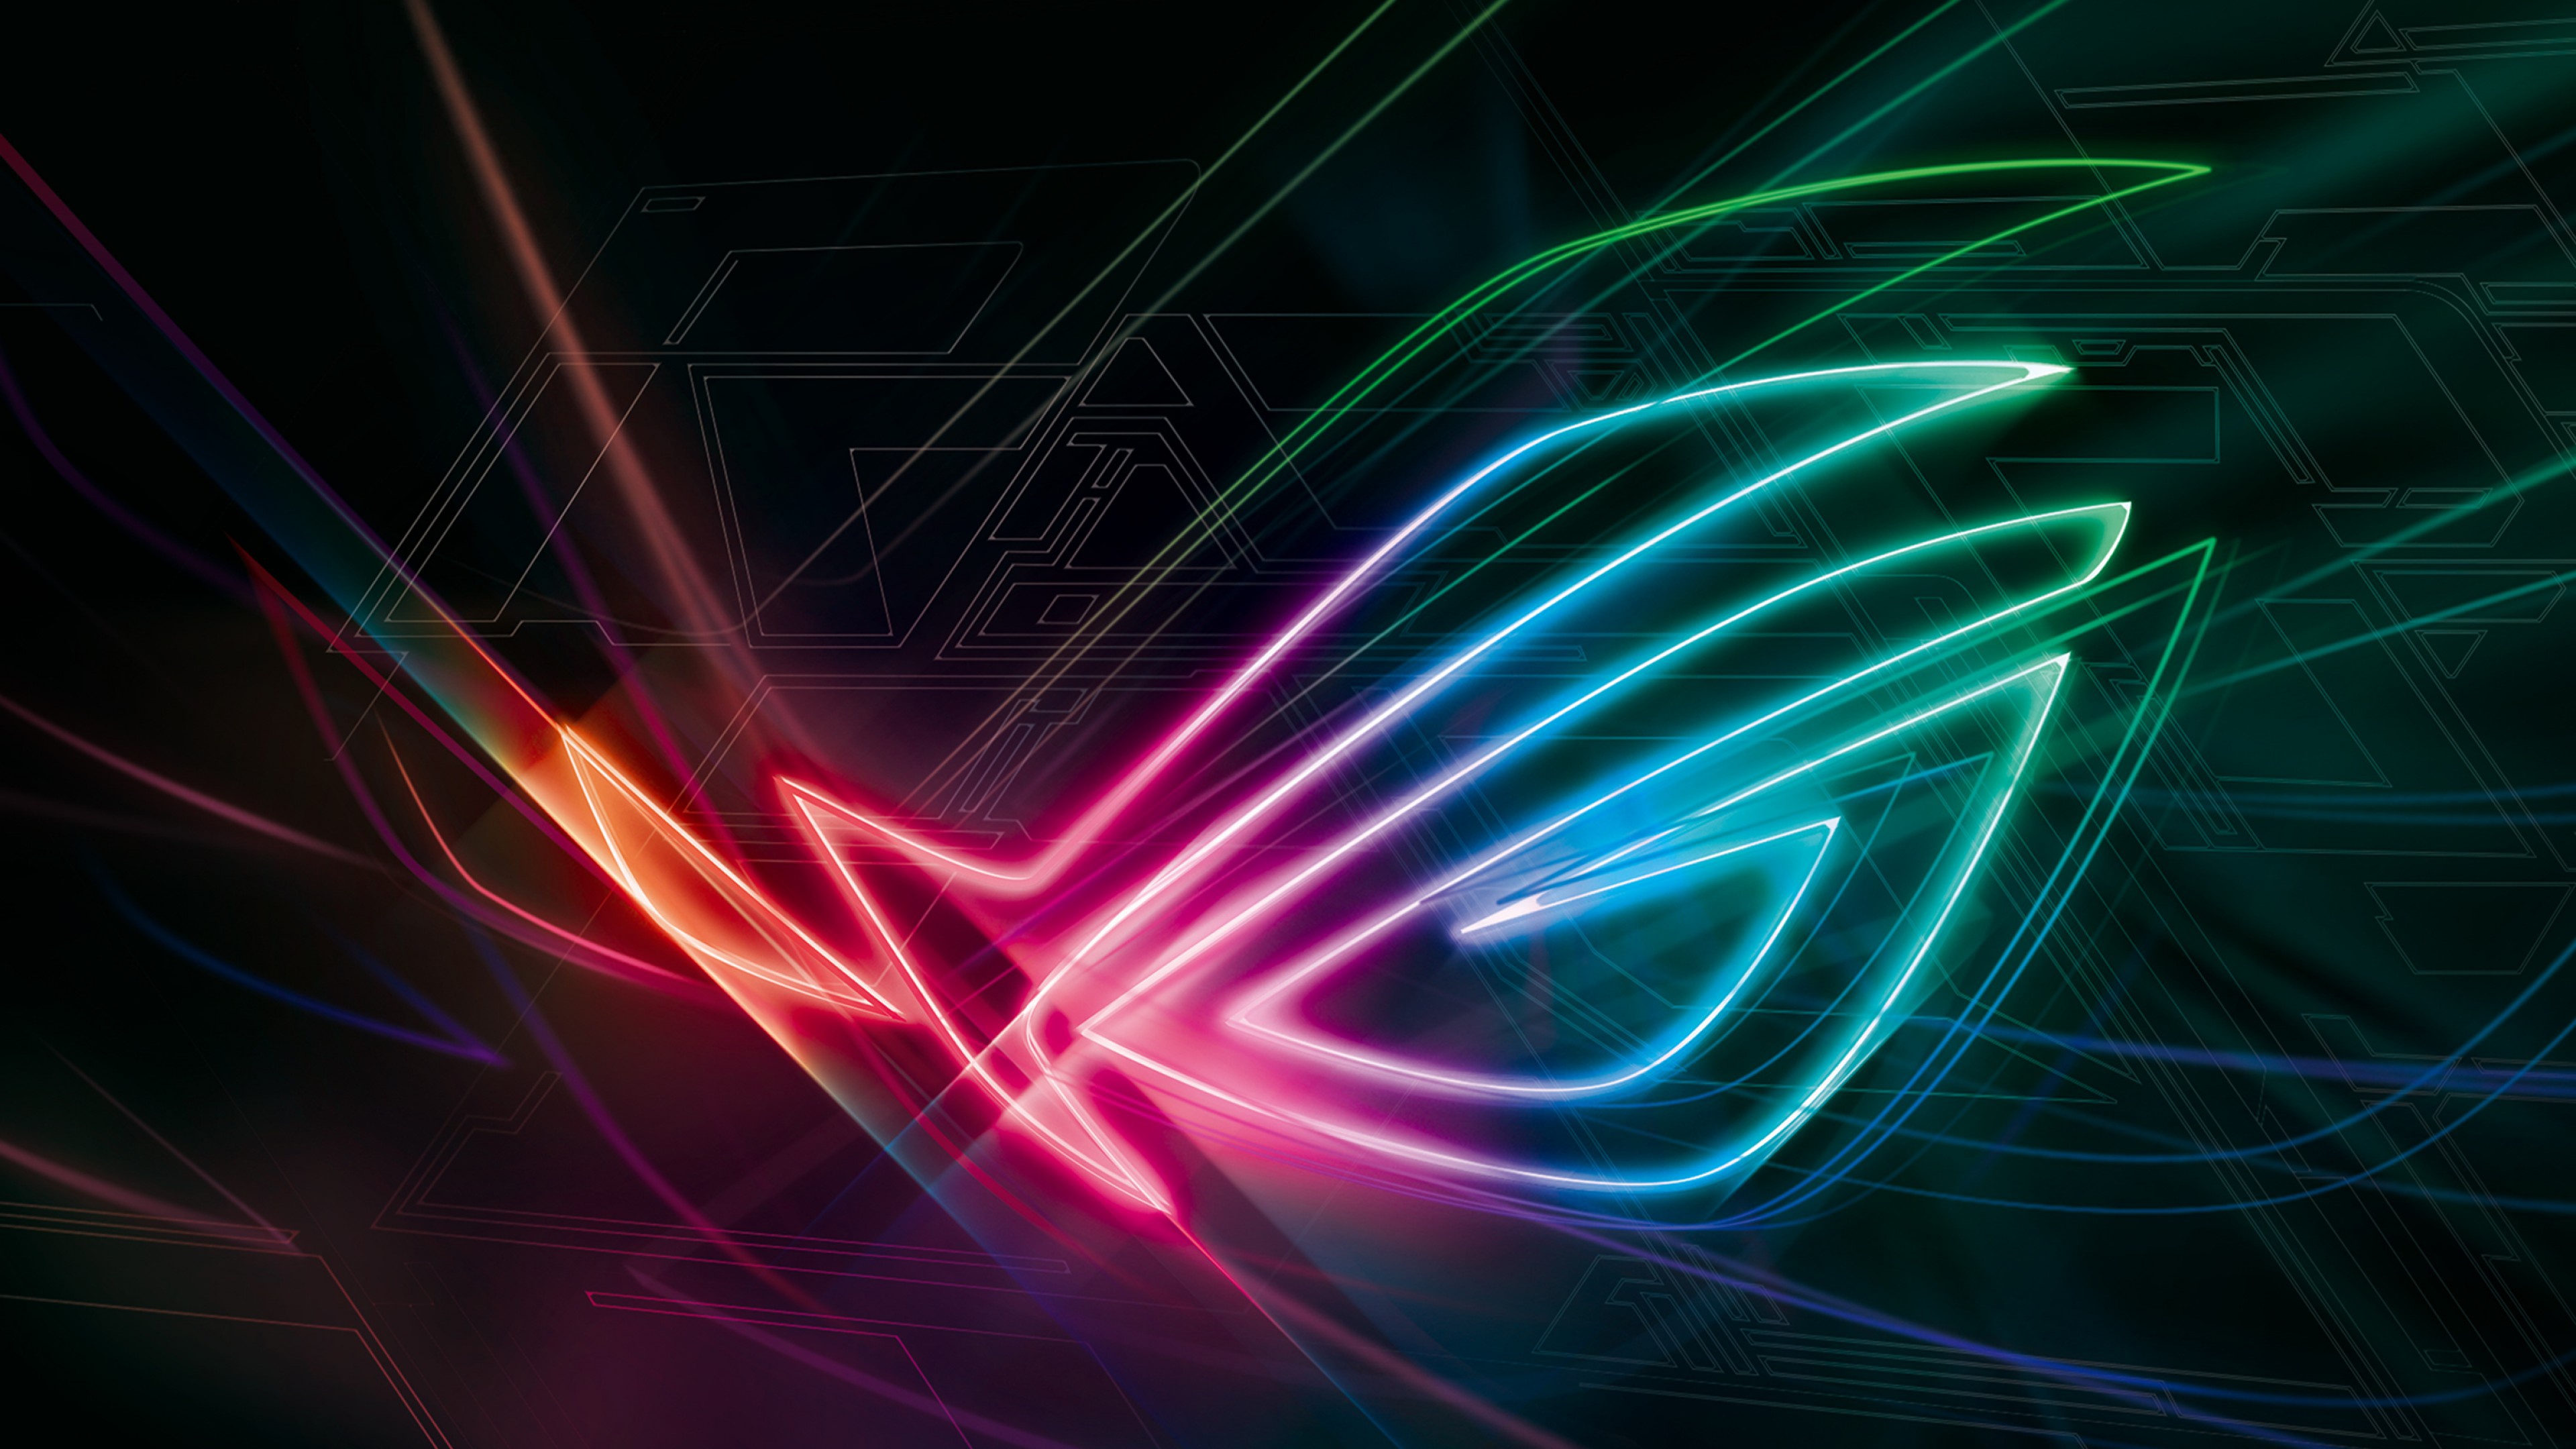 Asus 4K wallpapers for your desktop or mobile screen free and easy to  download